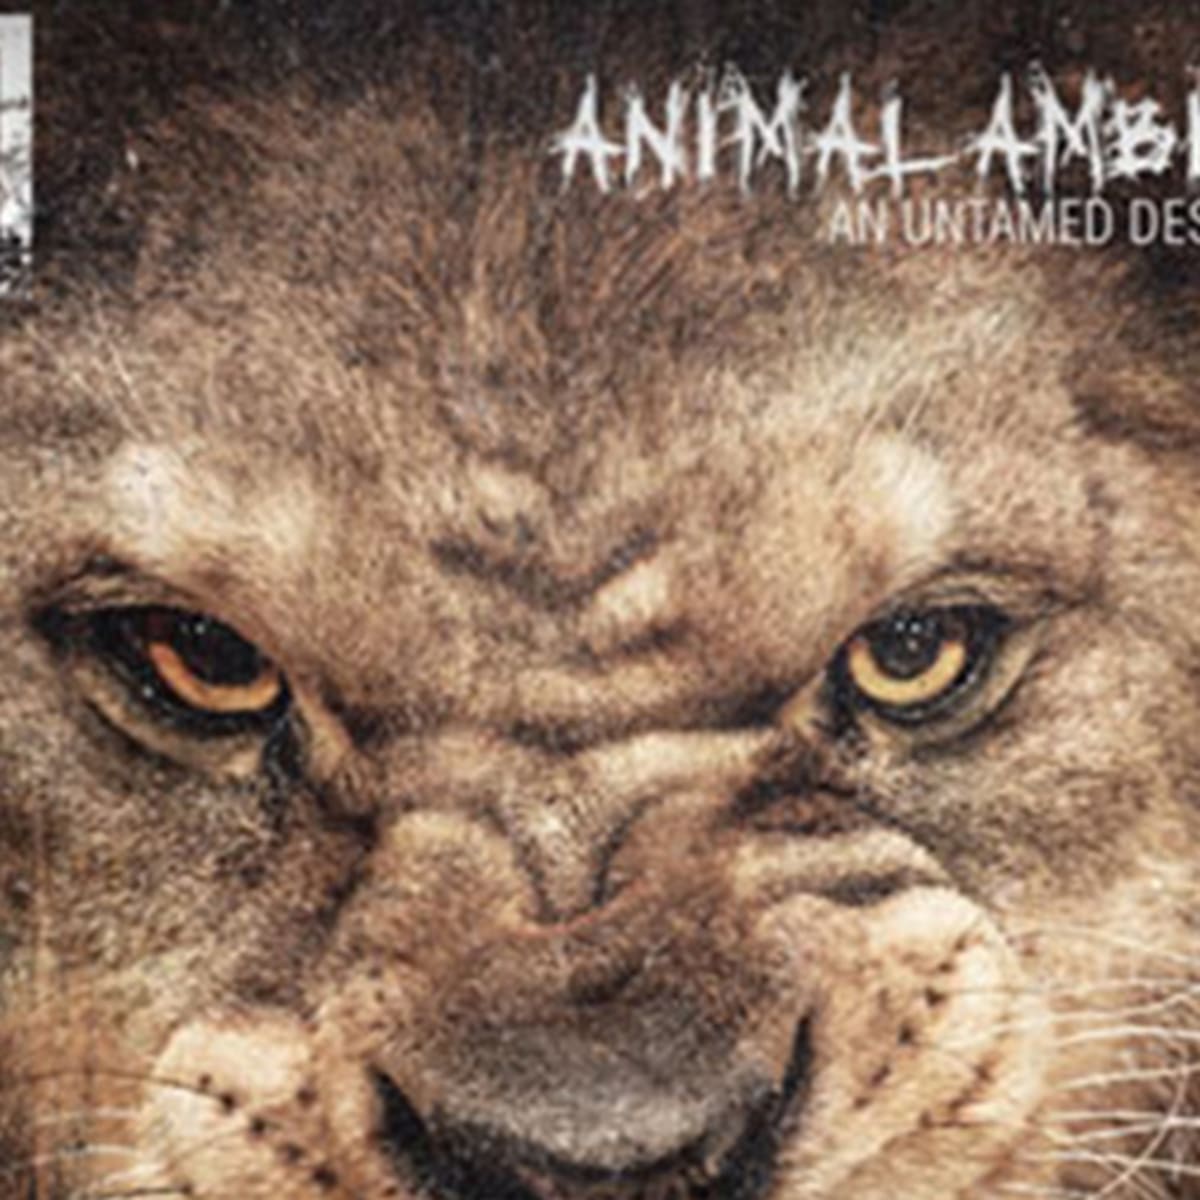 50 Cent: My Fifth Album 'Animal Ambition' Was an Unexpected Project - Video  - TheStreet